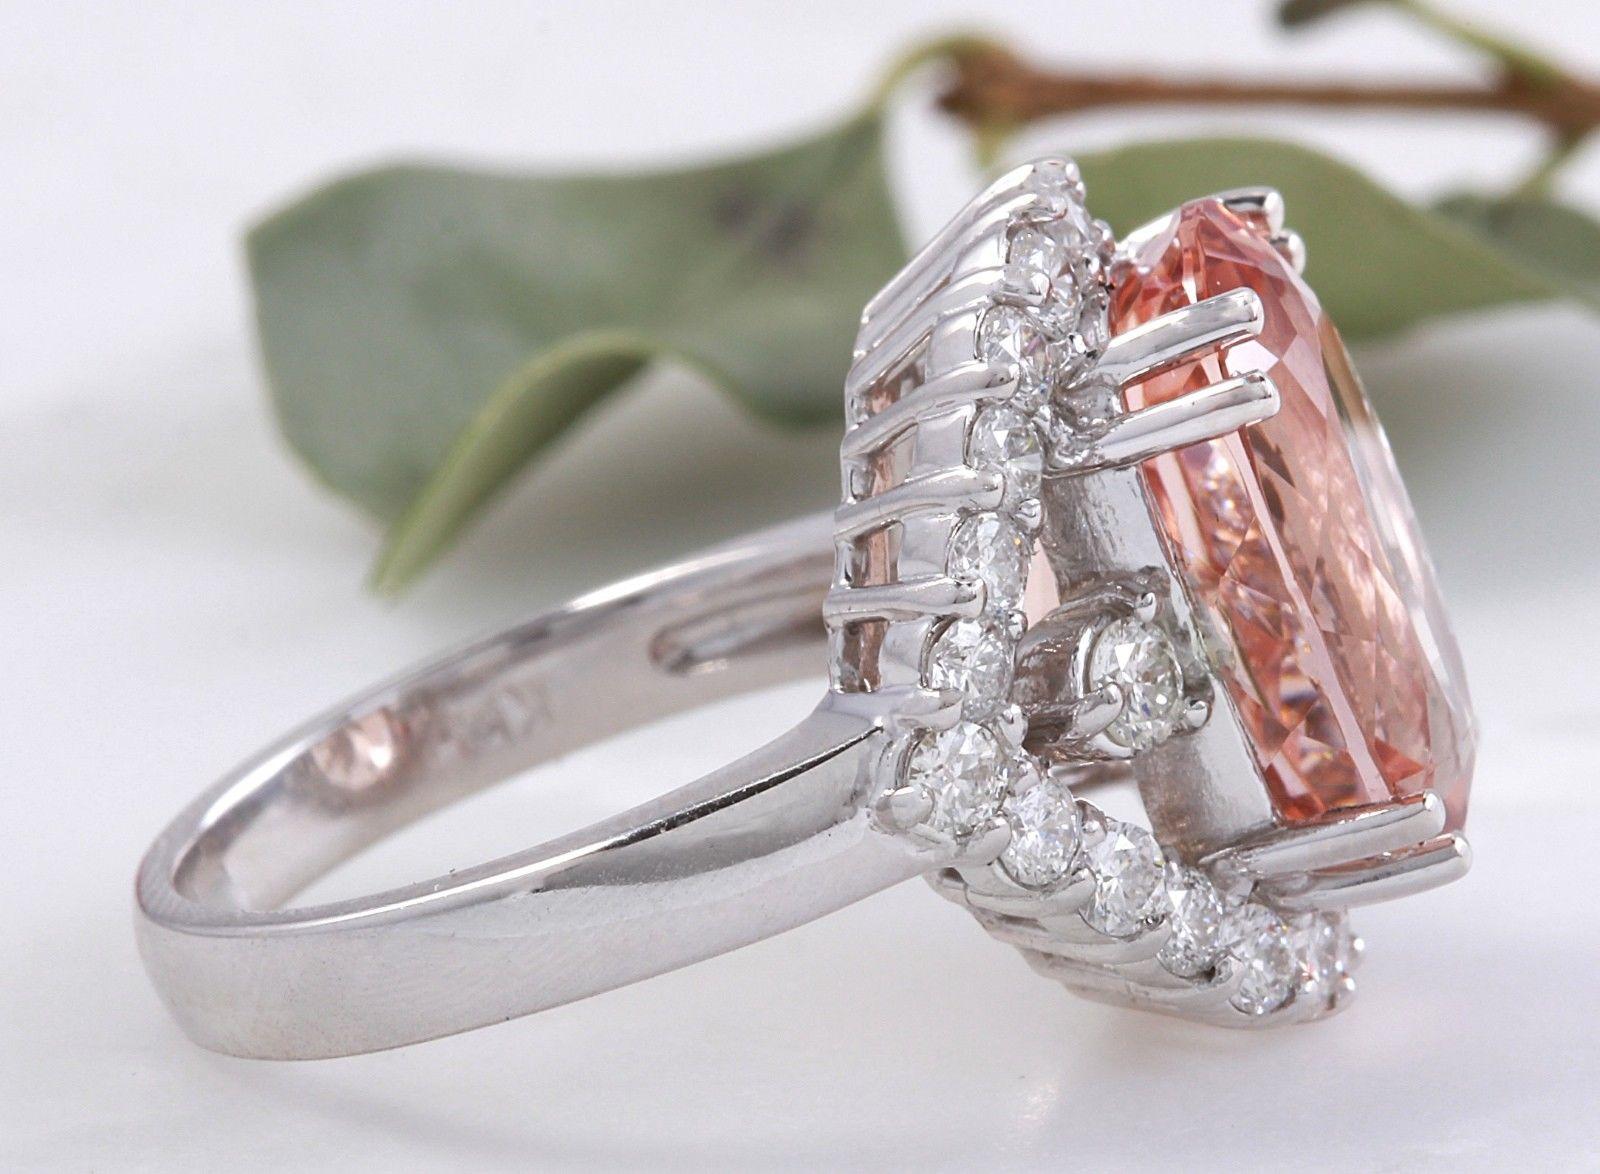 7.50 Carats Exquisite Natural Morganite and Diamond 14K Solid White Gold Ring

Suggested Replacement Value: $7,200.00

Total Natural Oval Shaped Morganite Weights: Approx. 6.50 Carats

Morganite Measures: Approx. 14.00 x 11.00mm

Natural Round